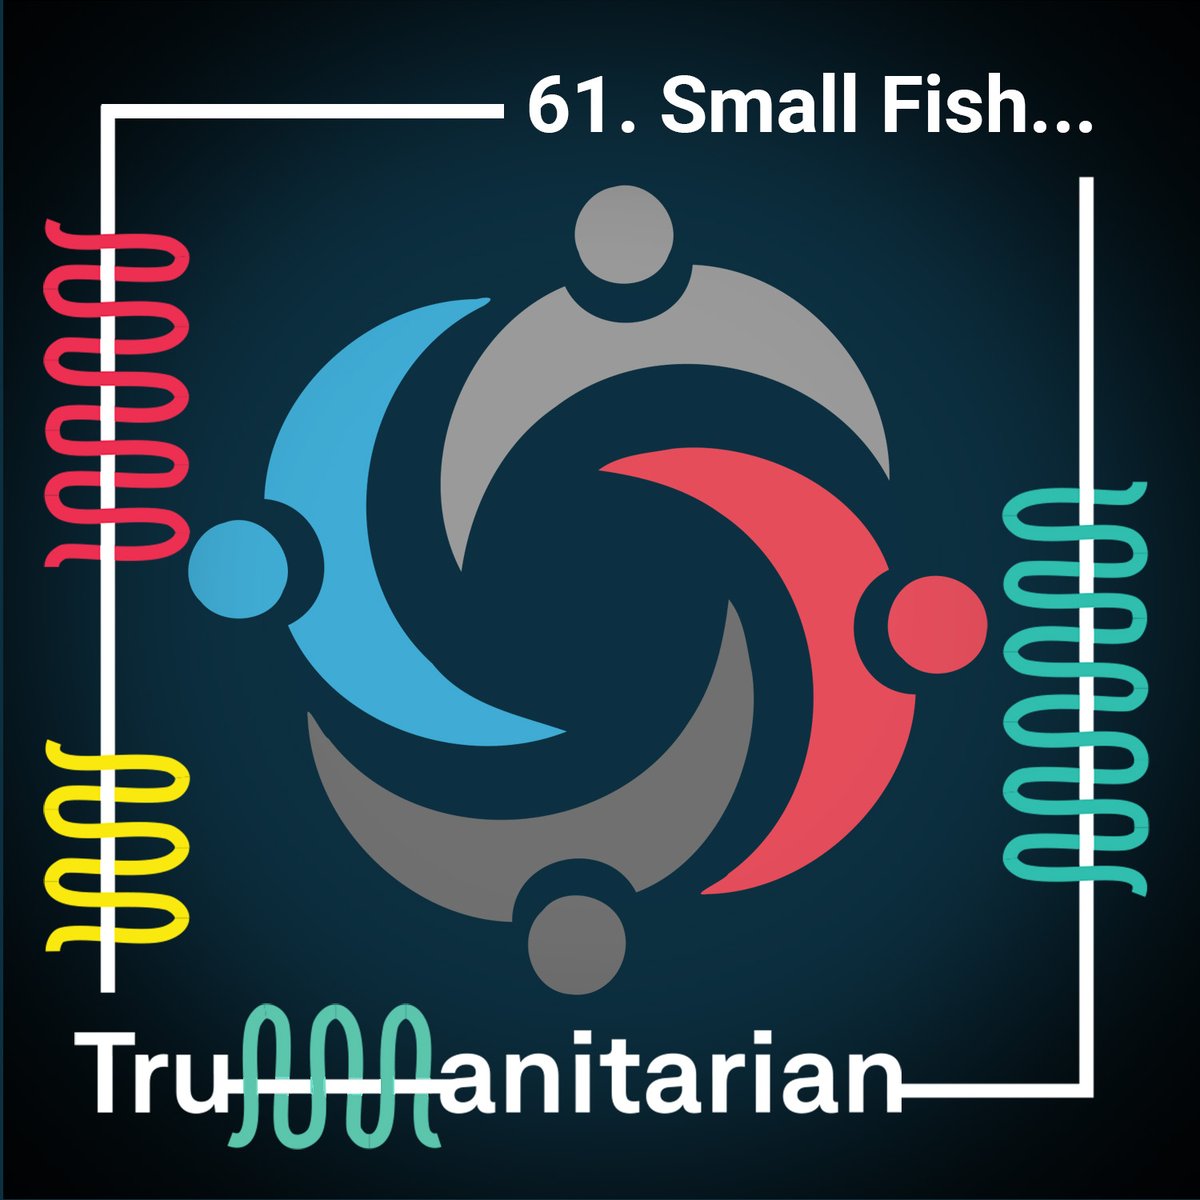 Why is it so difficult for #ukraine civil society to tap into international funding? Listen to the @HEREGeneva and @trumanitarian panel here: trumanitarian.org/episodes/61-sm… #podcast #humanitarian #funding #localization